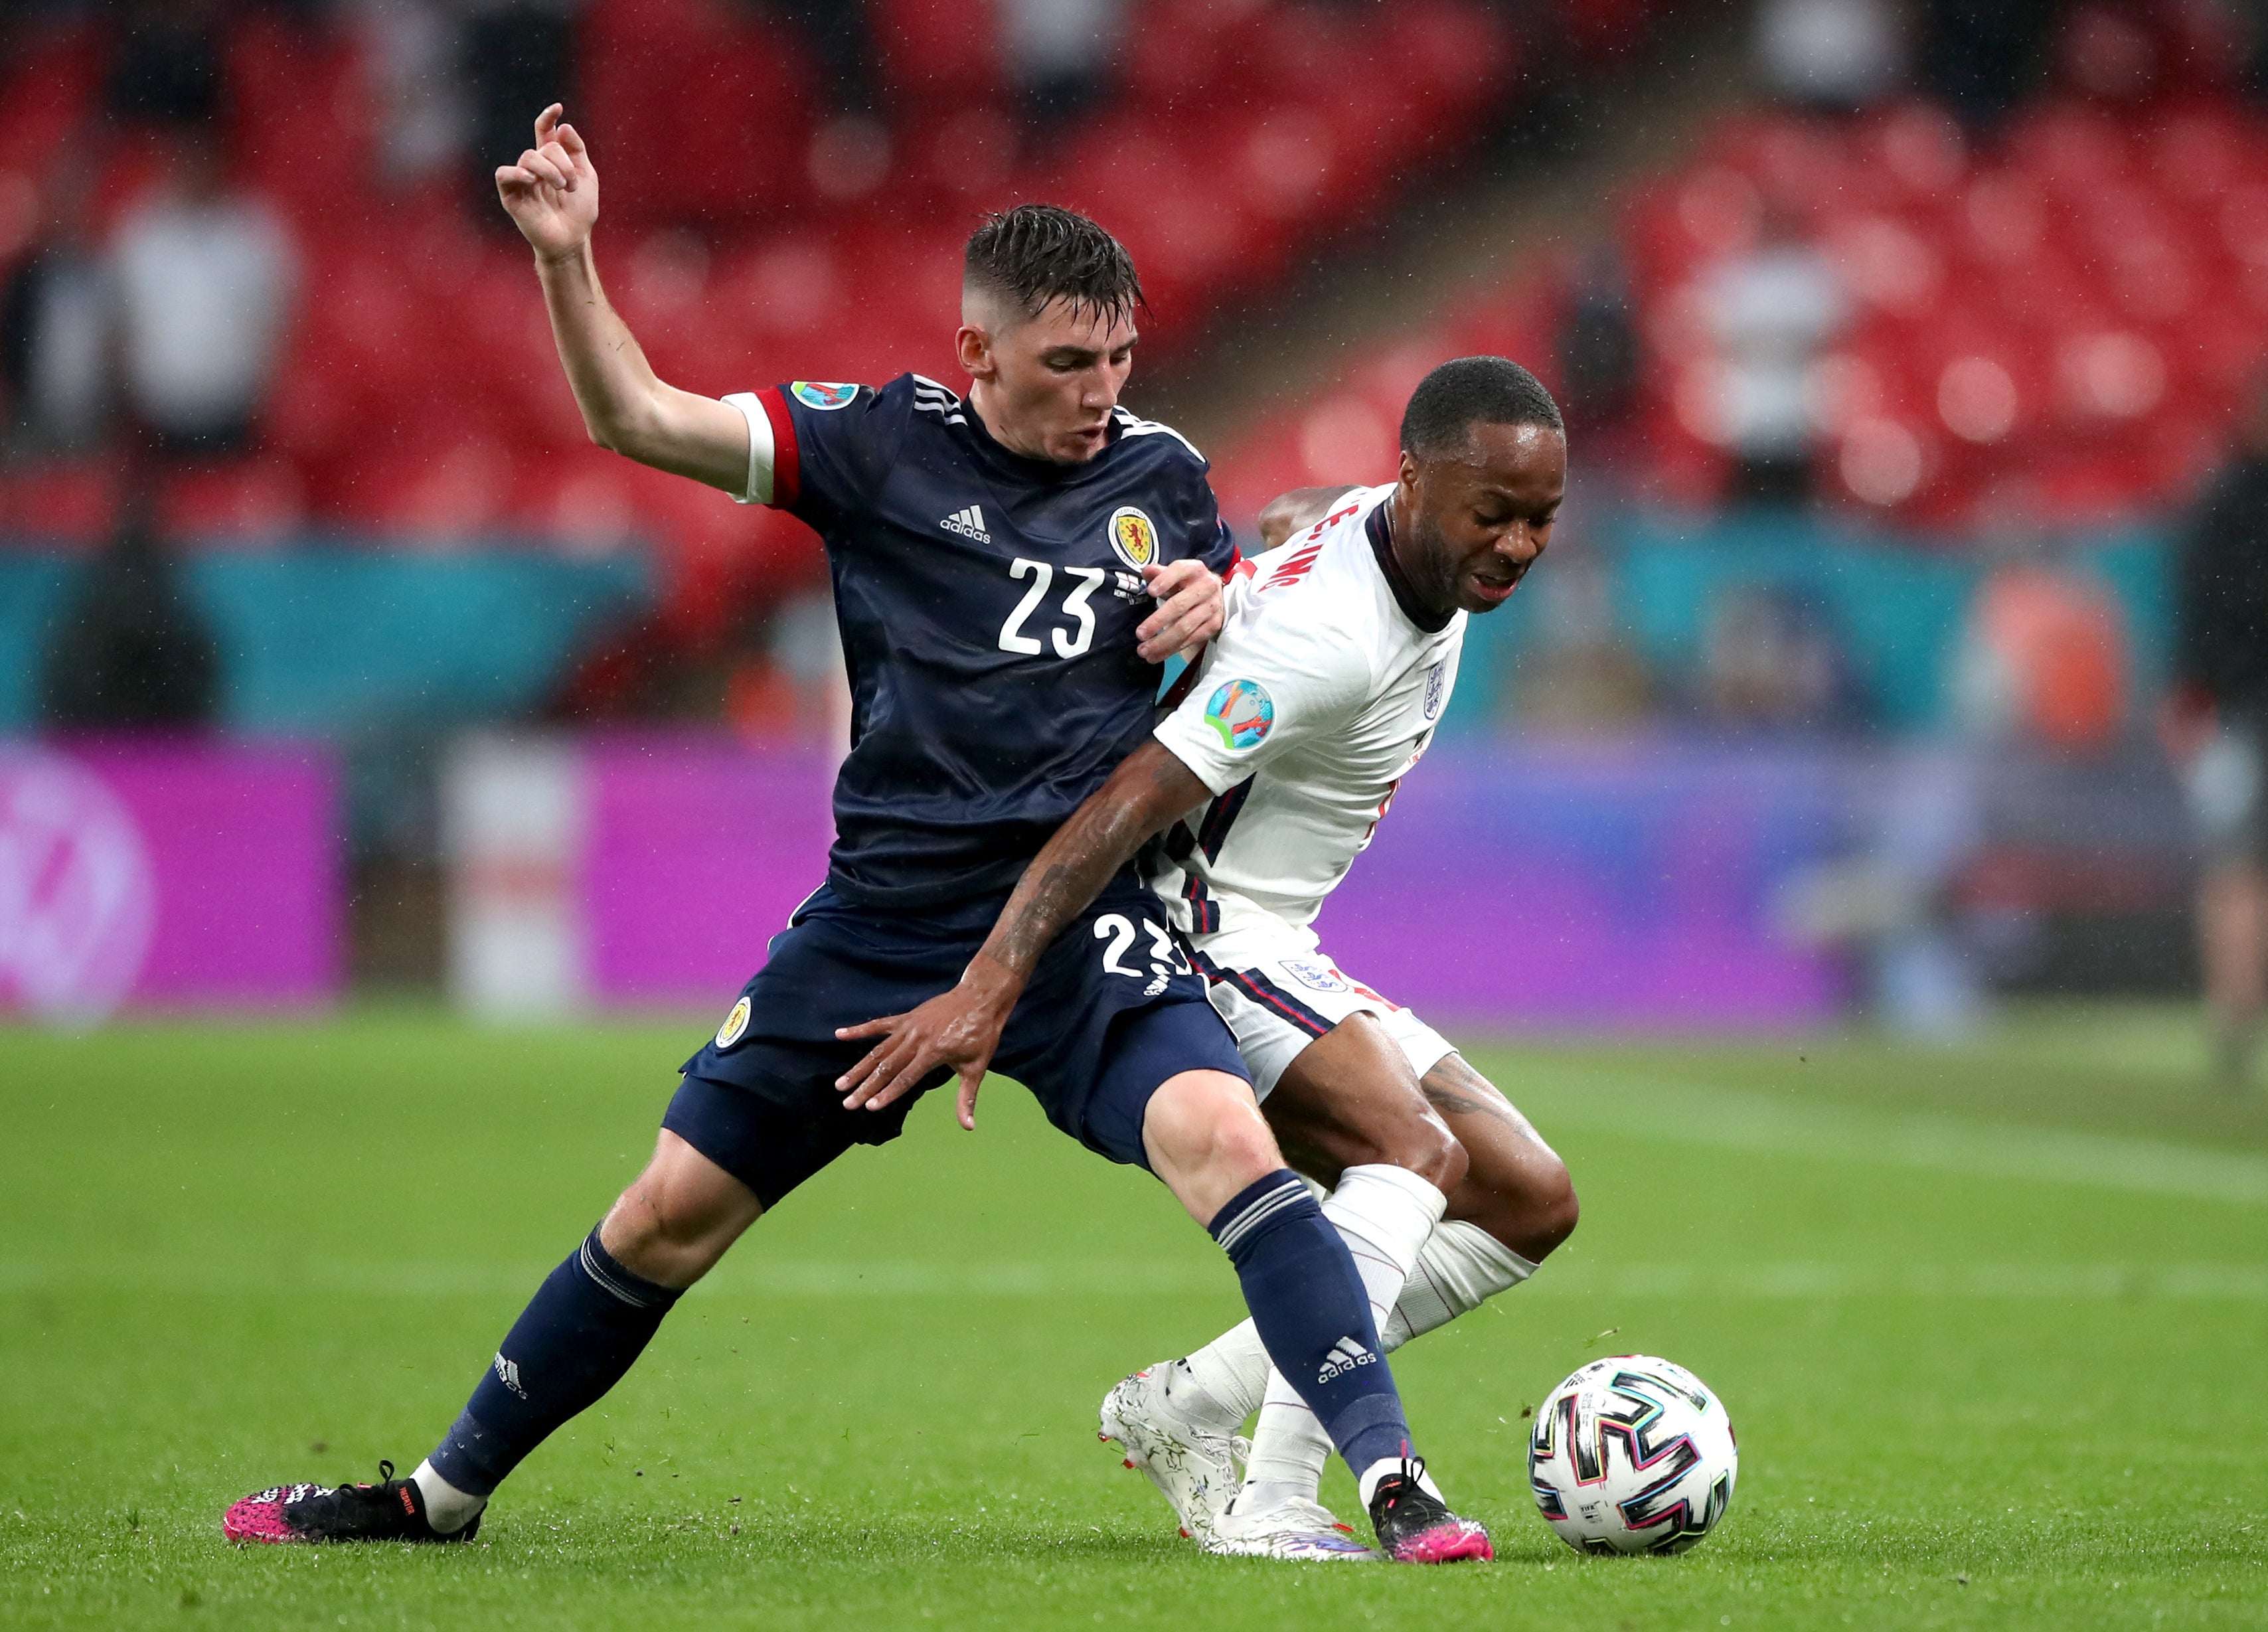 Scotland’s Billy Gilmour, left, and England’s Raheem Sterling